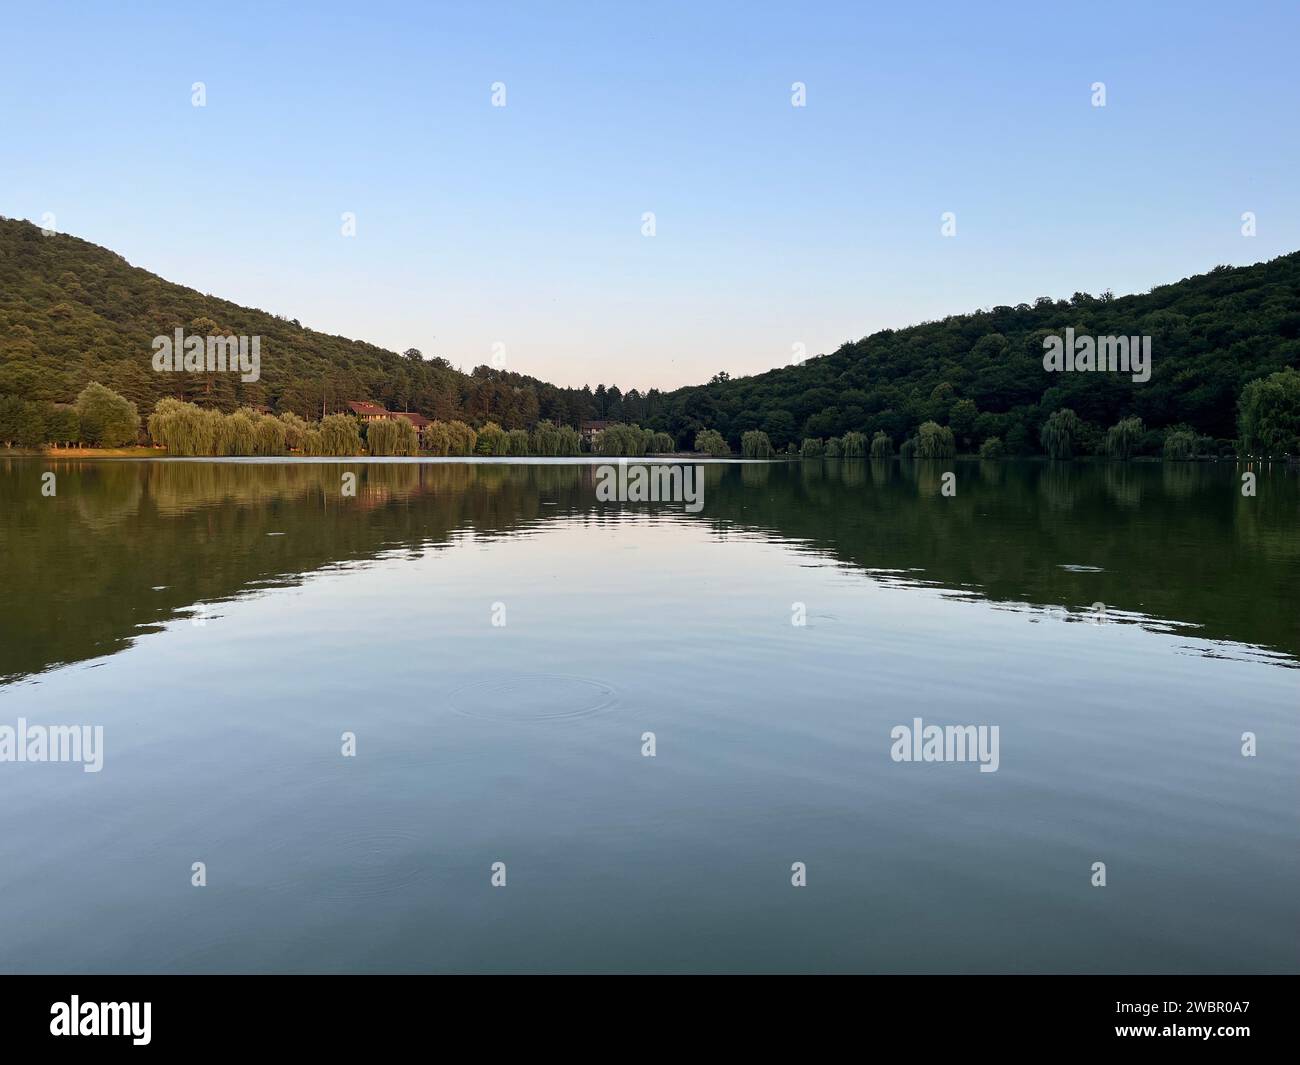 An idyllic natural landscape with a tranquil lake surrounded by lush green forest Stock Photo